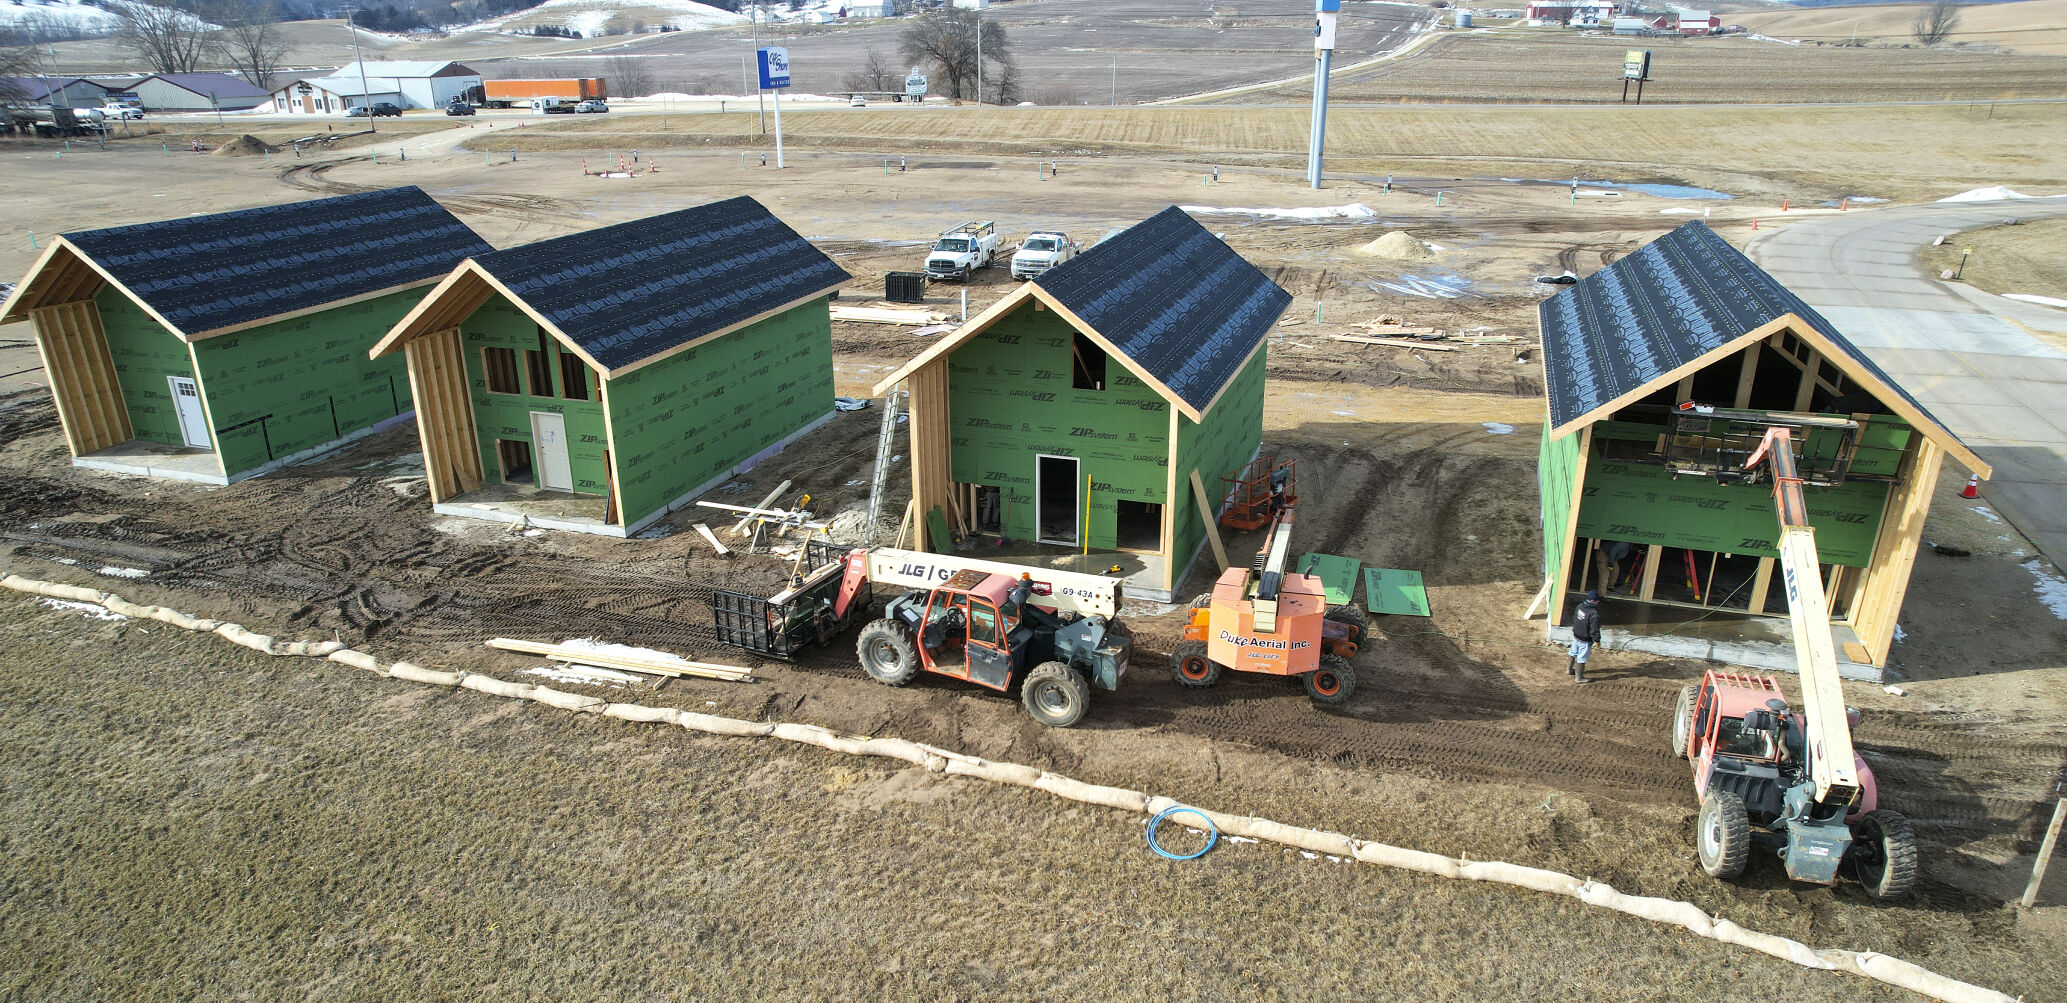 Construction crews work on building four villas at the Off Shore Resort in Bellevue, Iowa on Wednesday, Feb. 8, 2023.    PHOTO CREDIT: Dave Kettering